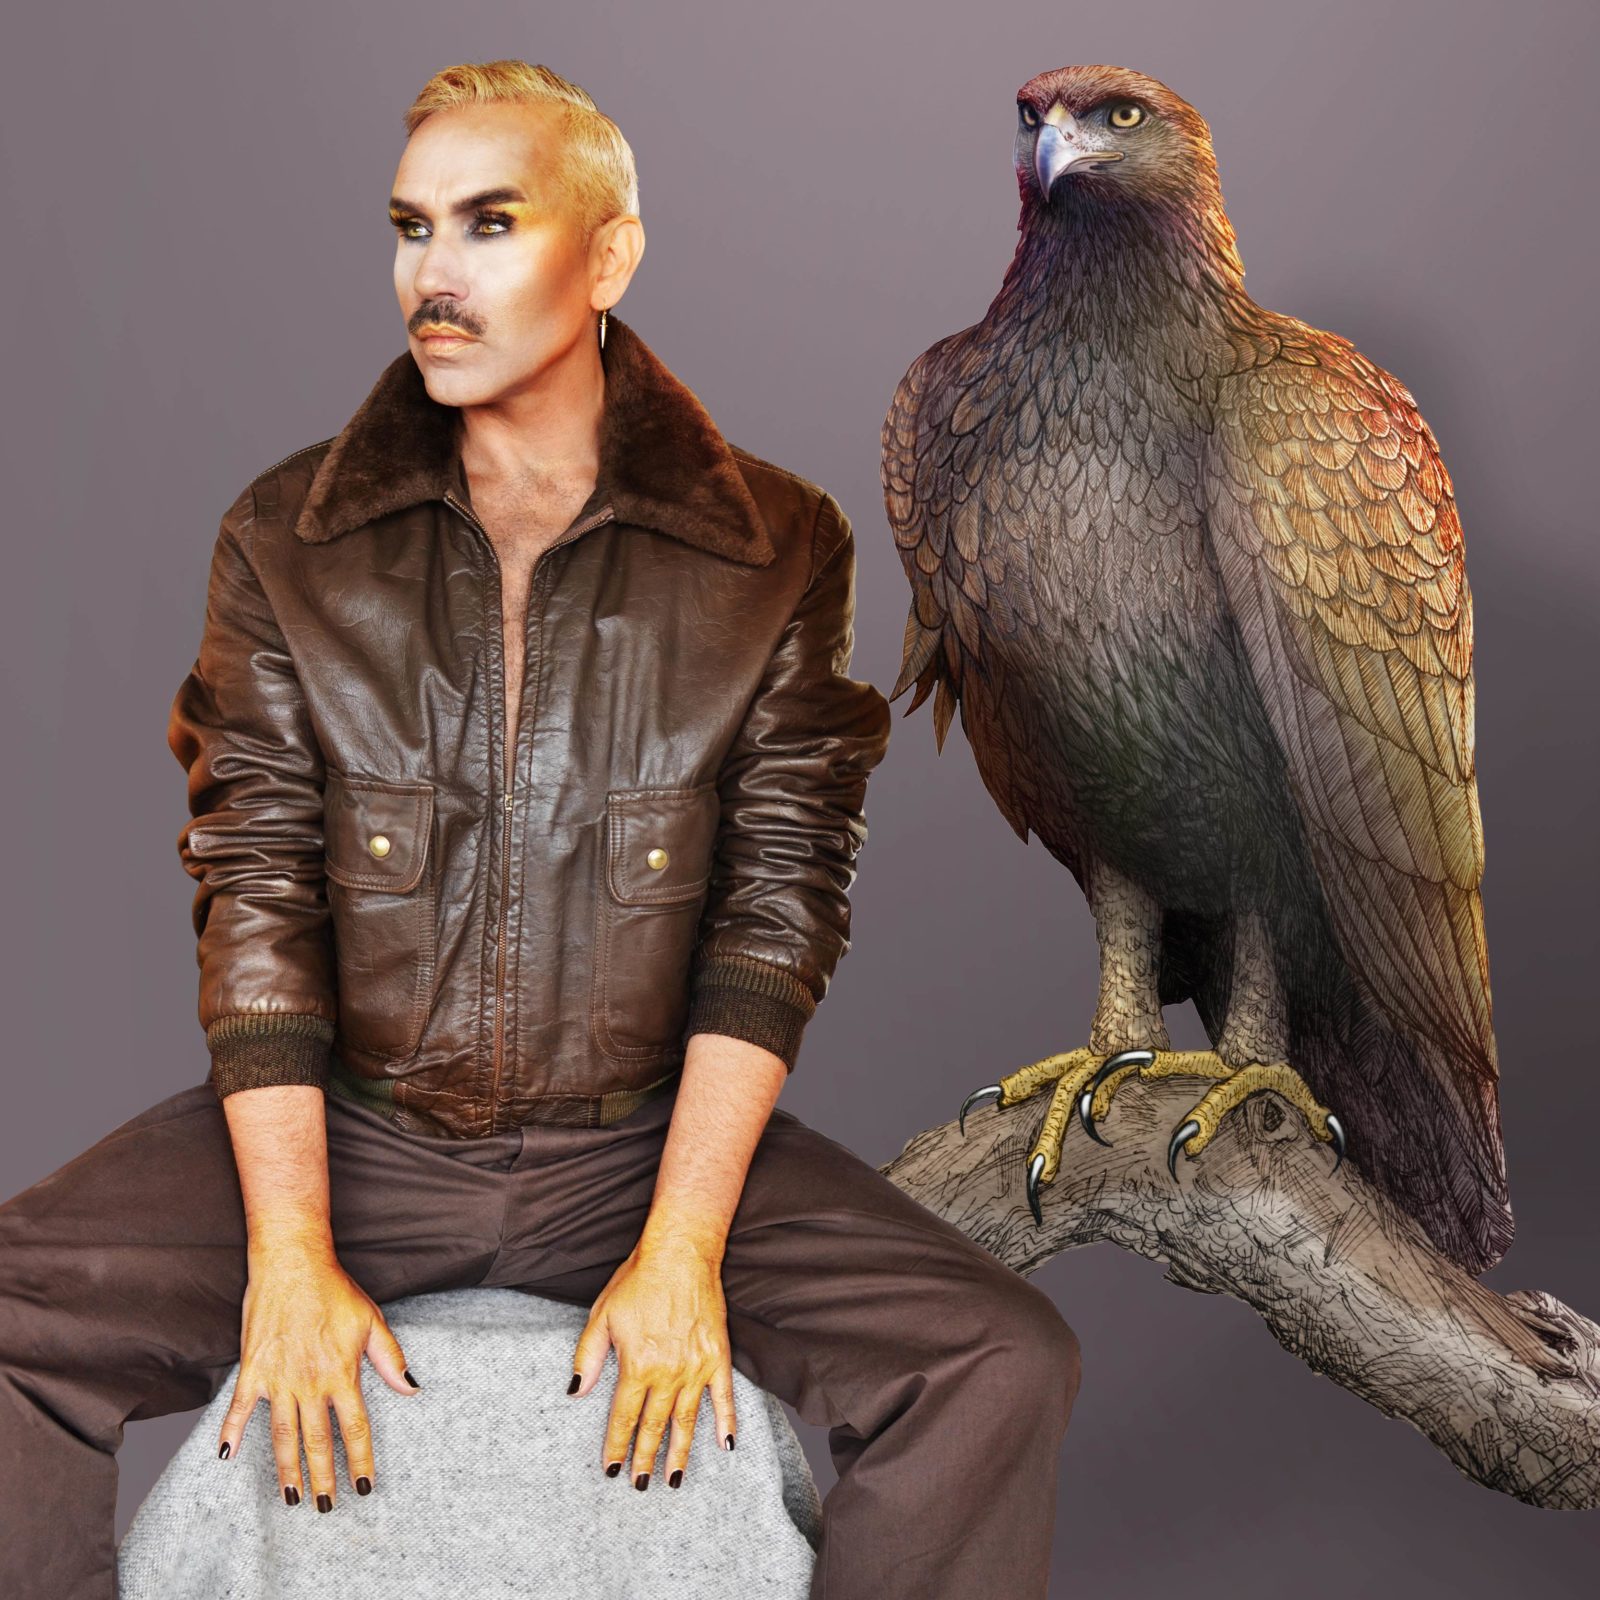 Paul Harfleet is dressed up as a Golden Eagle, with blonde hair, dark smokey eye shadow and gold highlights on his lips, brow bone and hands. He is wearing a brown leather jacket, brown trousers and behind him is an illustration of a golden eagle.